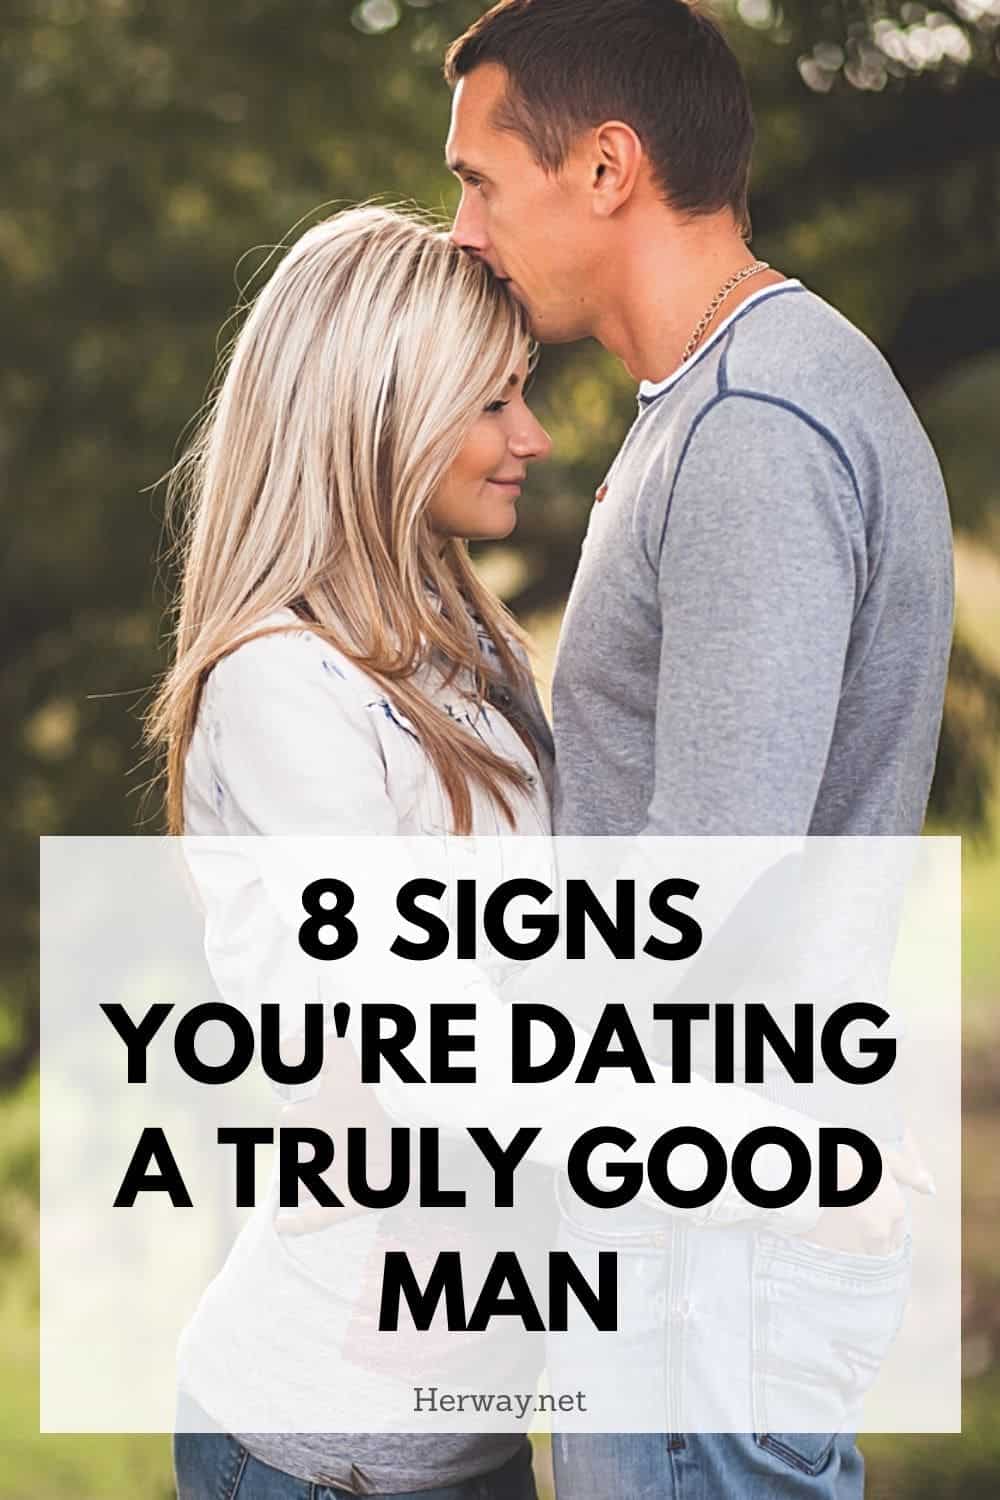 8 Signs You're Dating A Truly Good Man